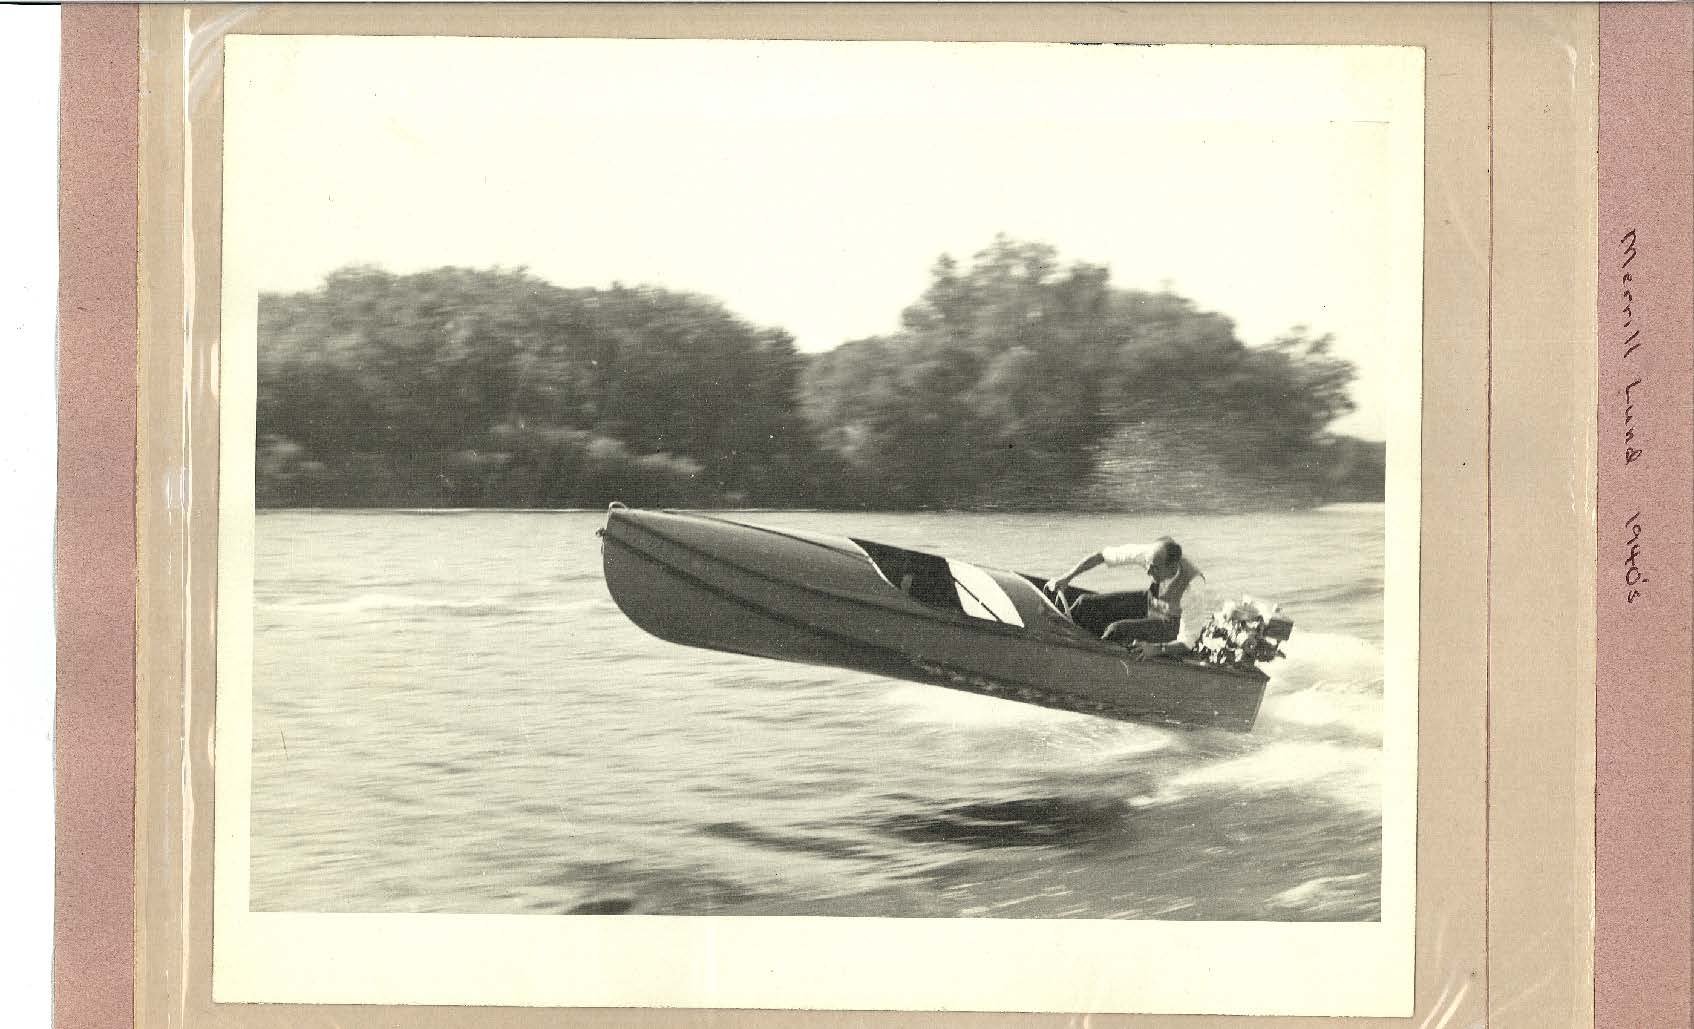 Photo "Merrill Lund 1940's" shows small race boat